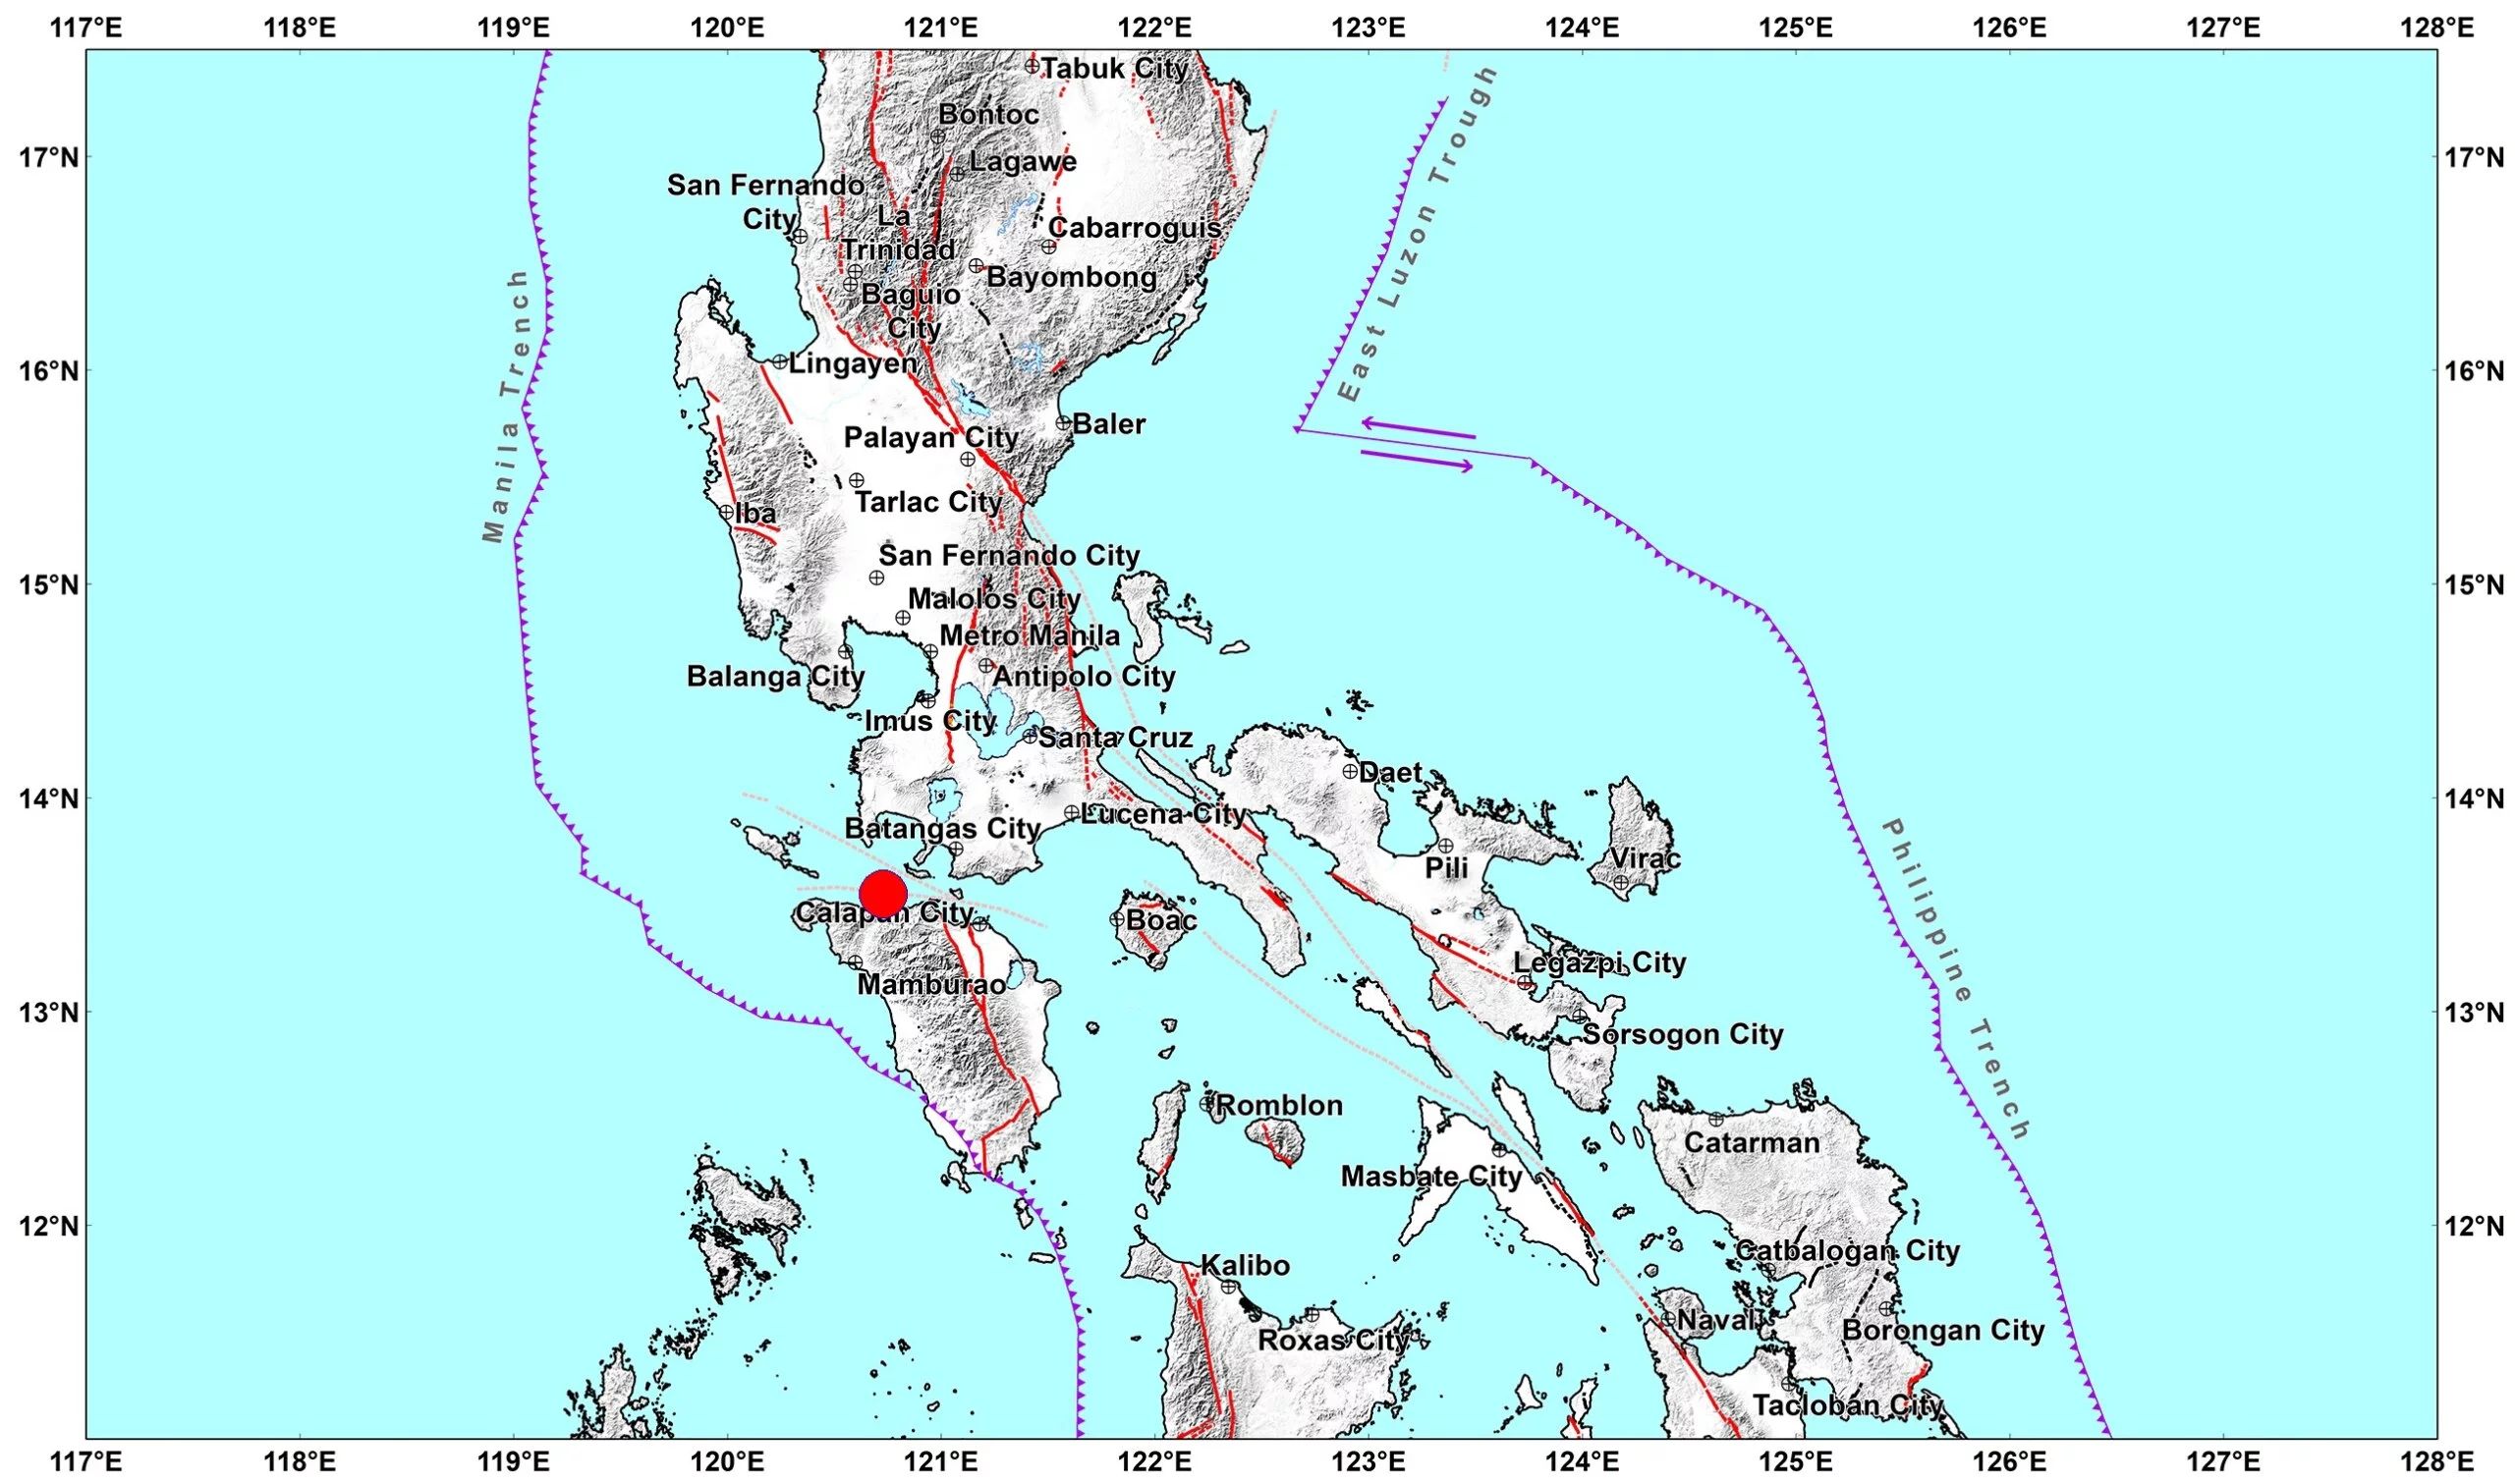 A magnitude 5.8 earthquake hits Abra De Ilog, Occidental Mindoro at 9:09 a.m. today, according to Phivolcs. Aftershocks are expected.